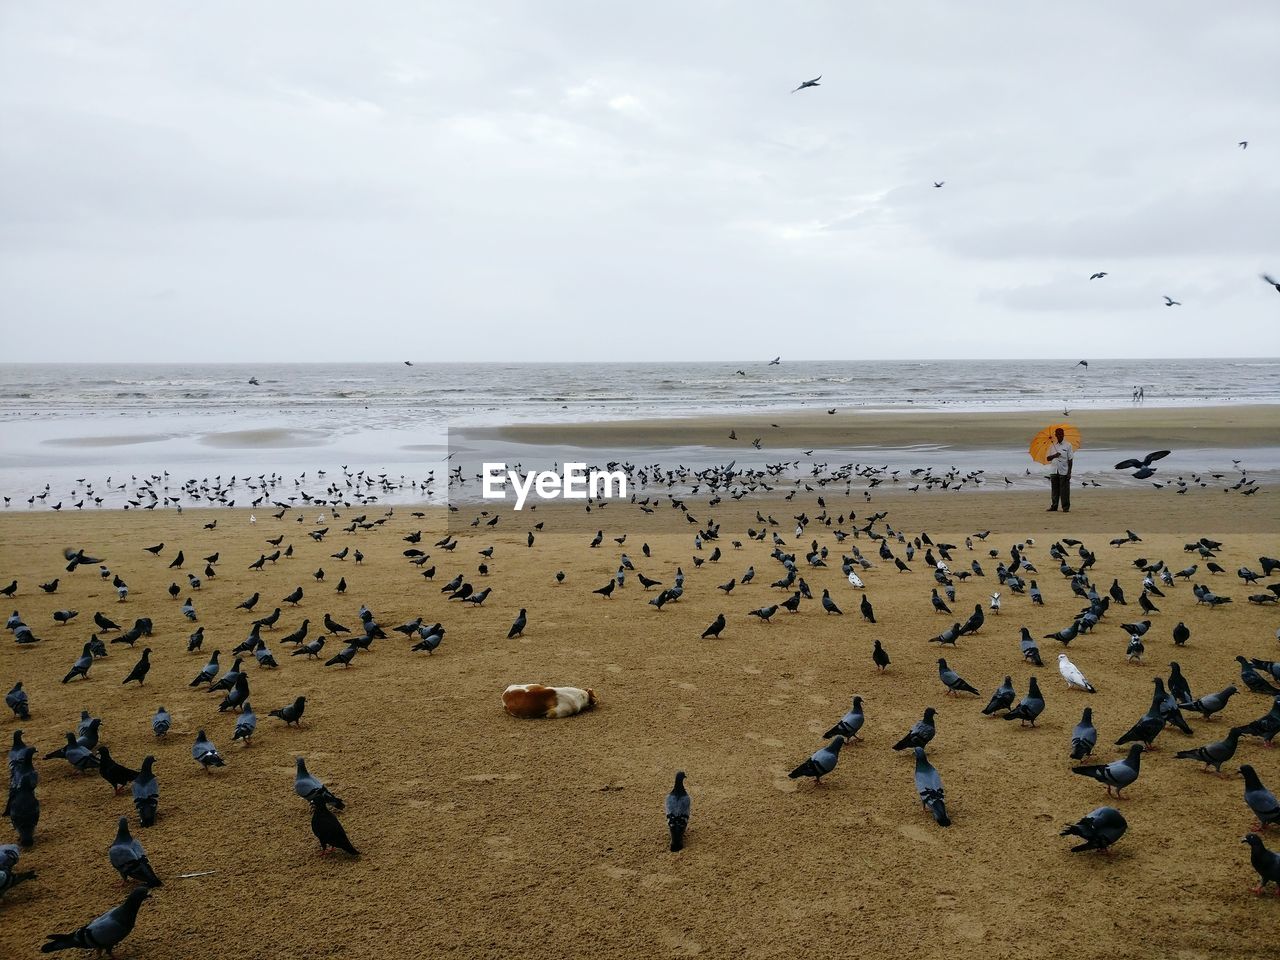 Distant view of man with umbrella standing amidst birds at beach